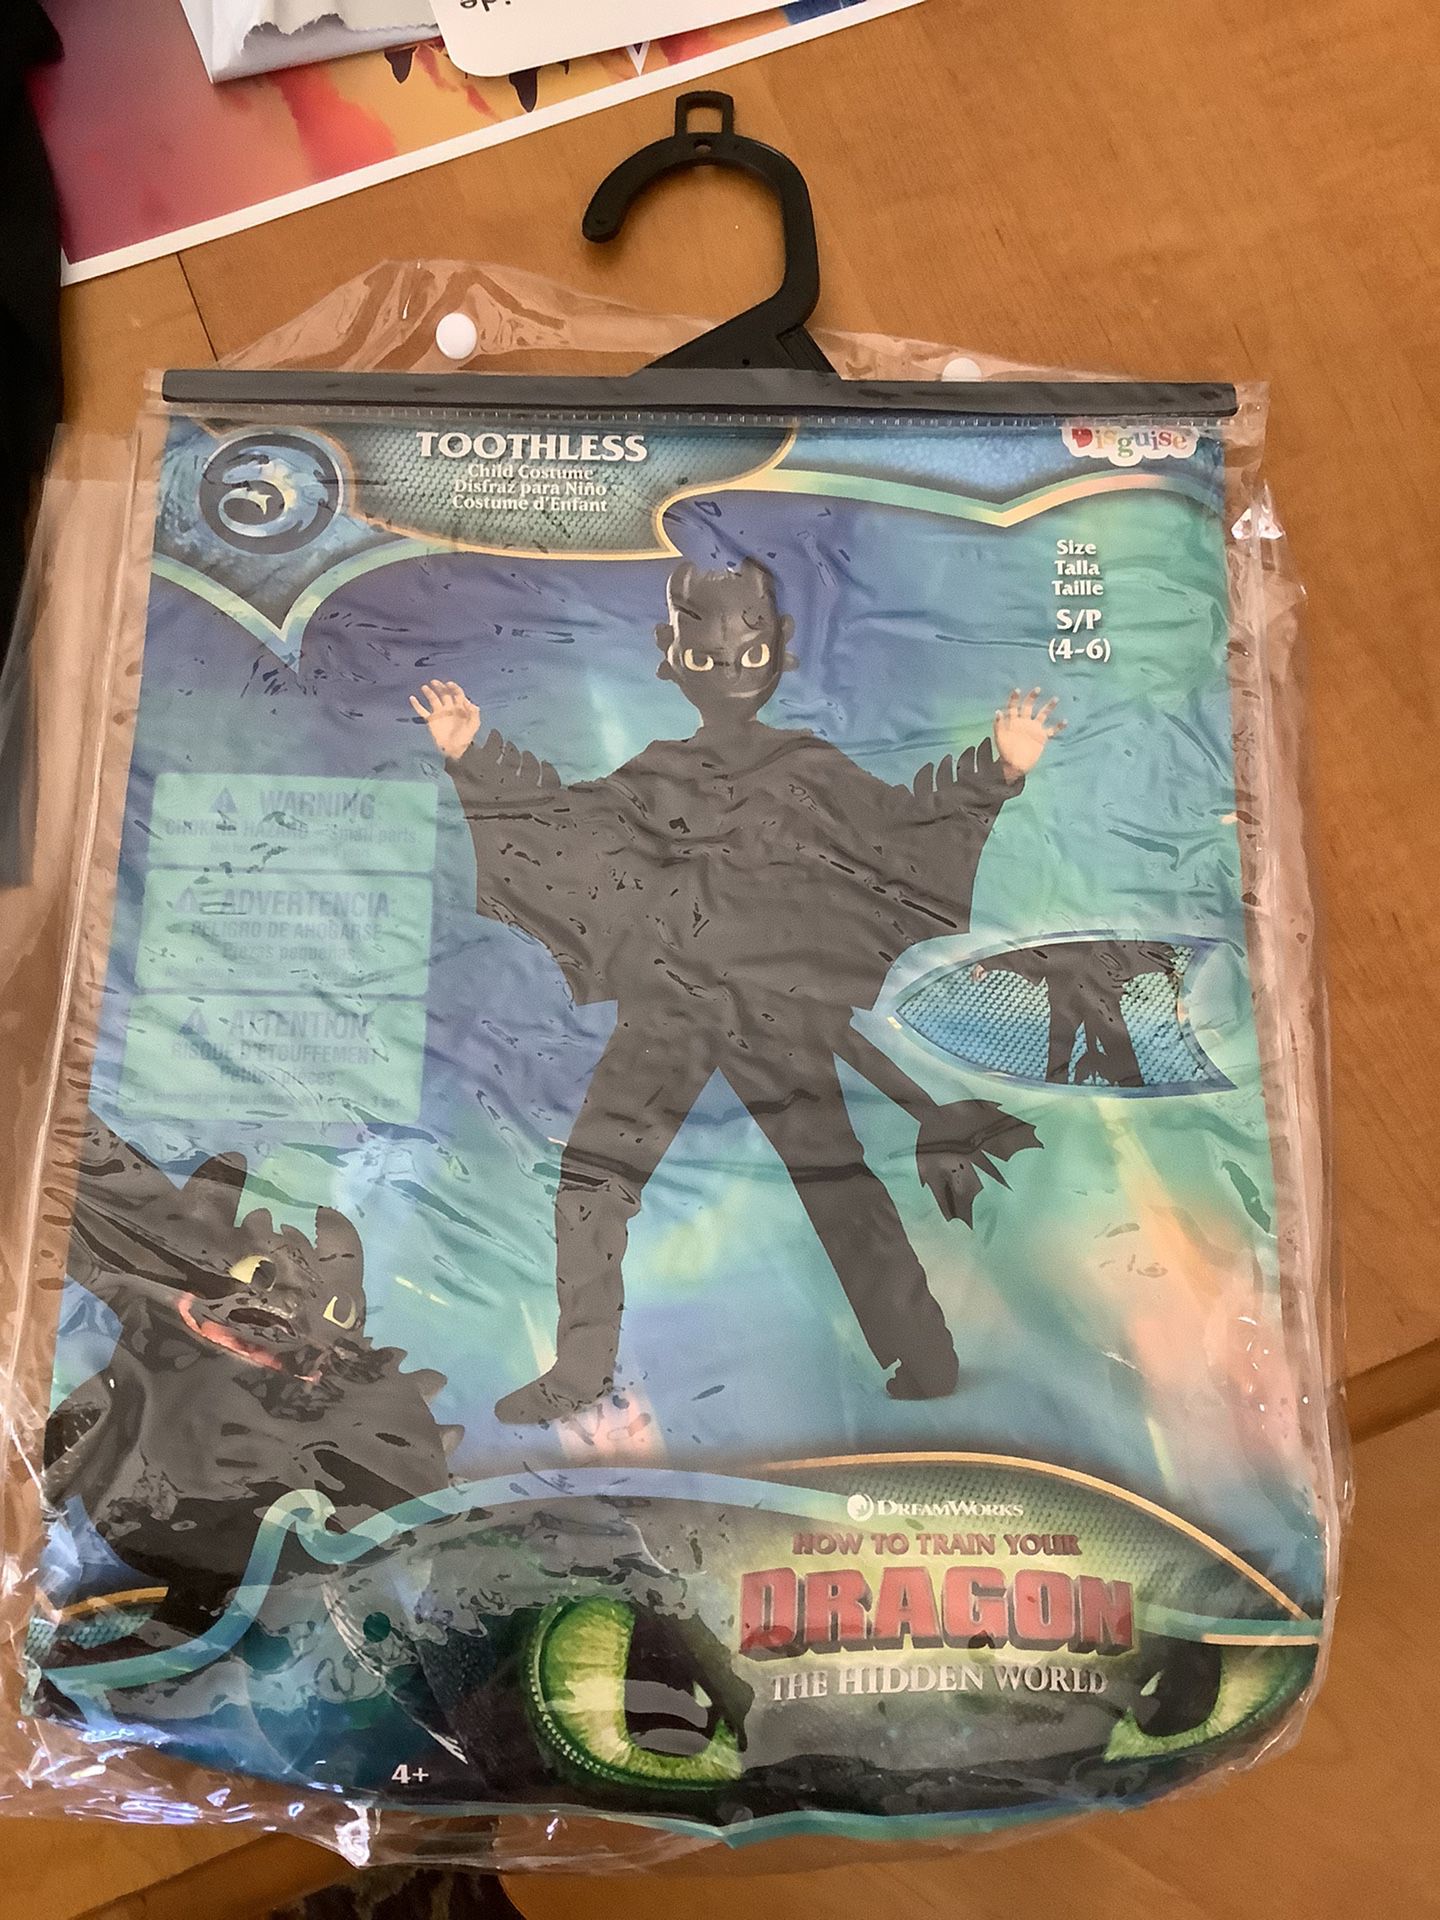 Boys Toothless costume from how to train your dragon